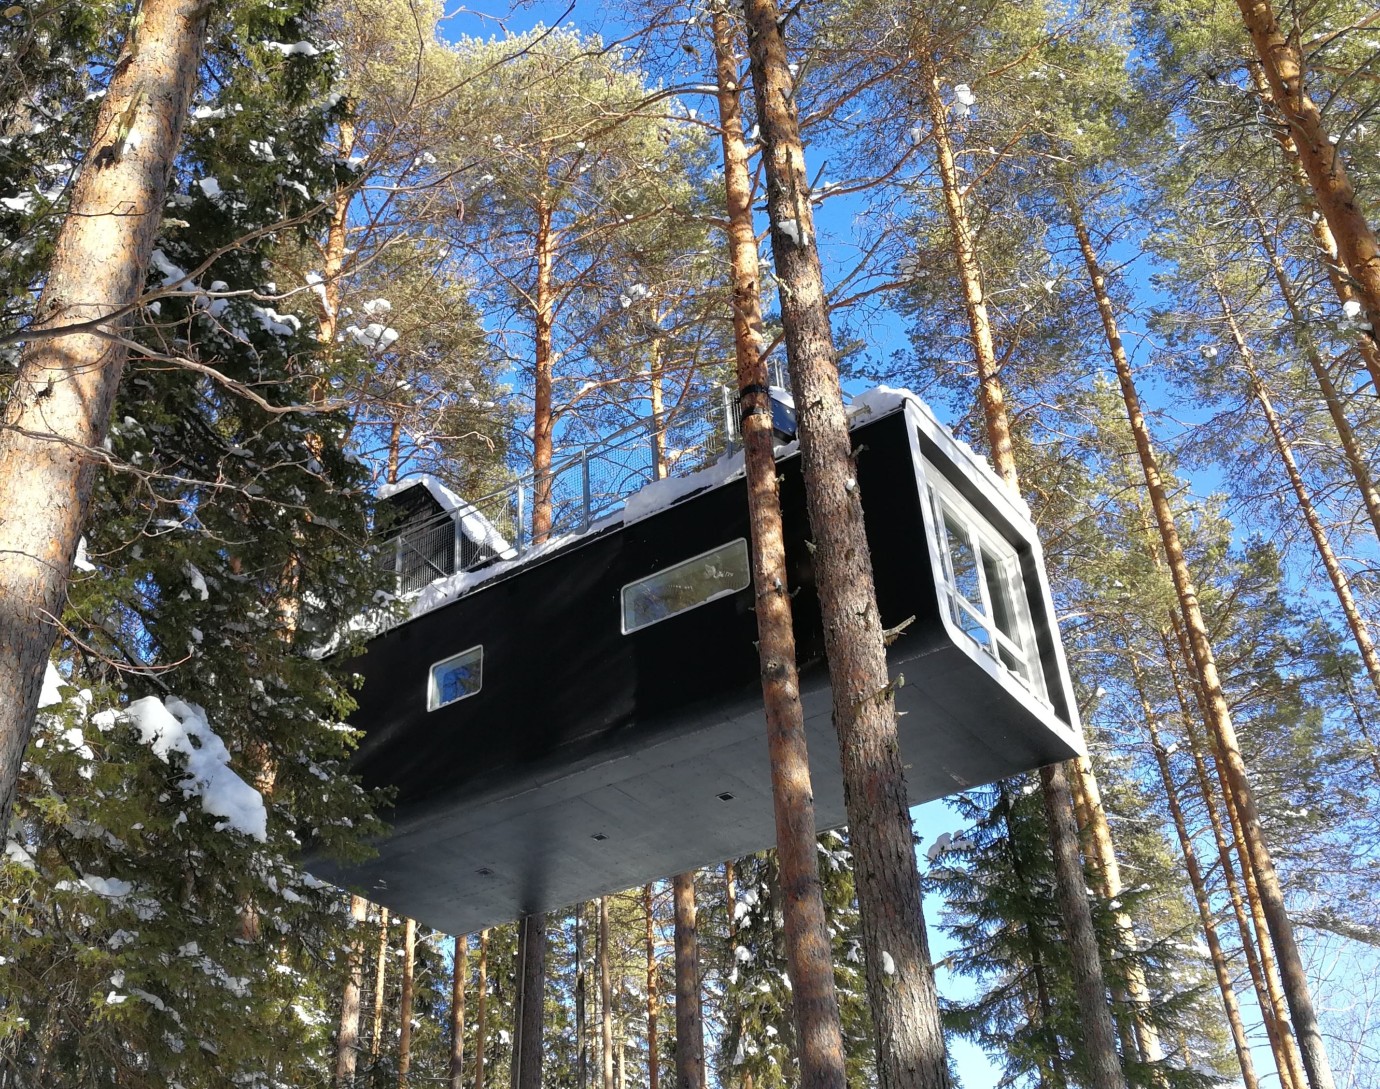 Treehotel - The Cabin